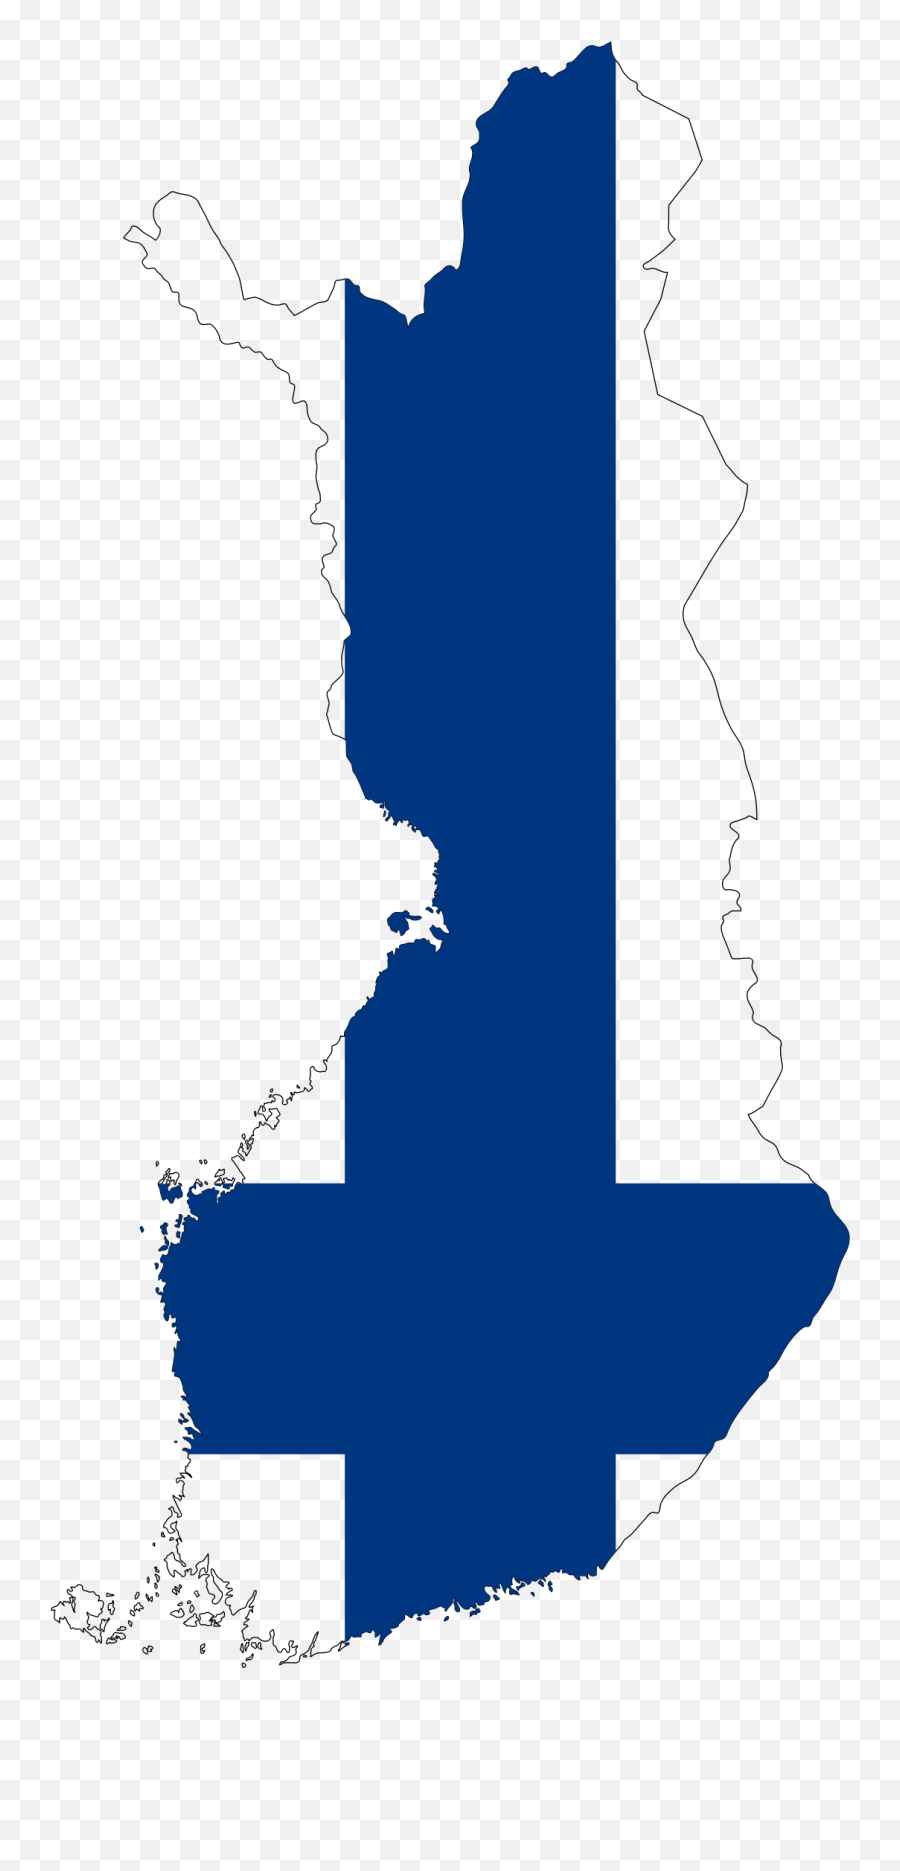 Finland Map Clipart - Finland Flag With Coat Of Arms Emoji,Finnish Flag Emoji